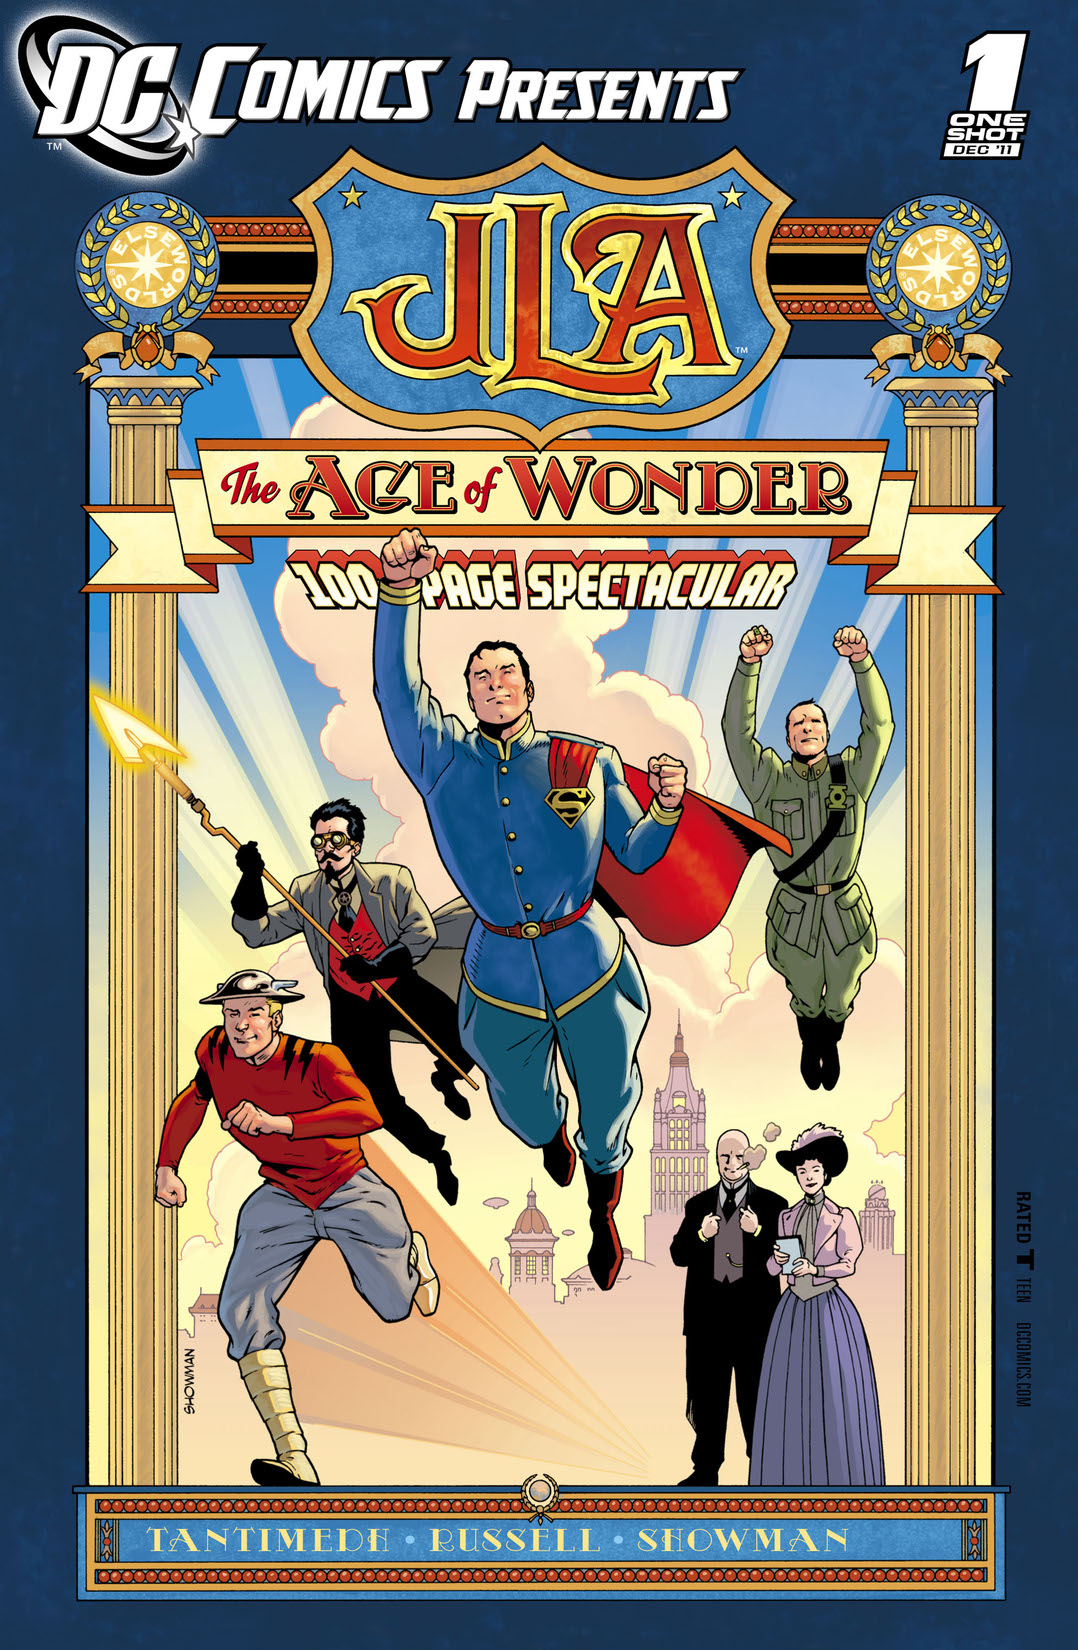 DC Comics Presents: JLA - The Age of Wonder (2011-) #1 preview images